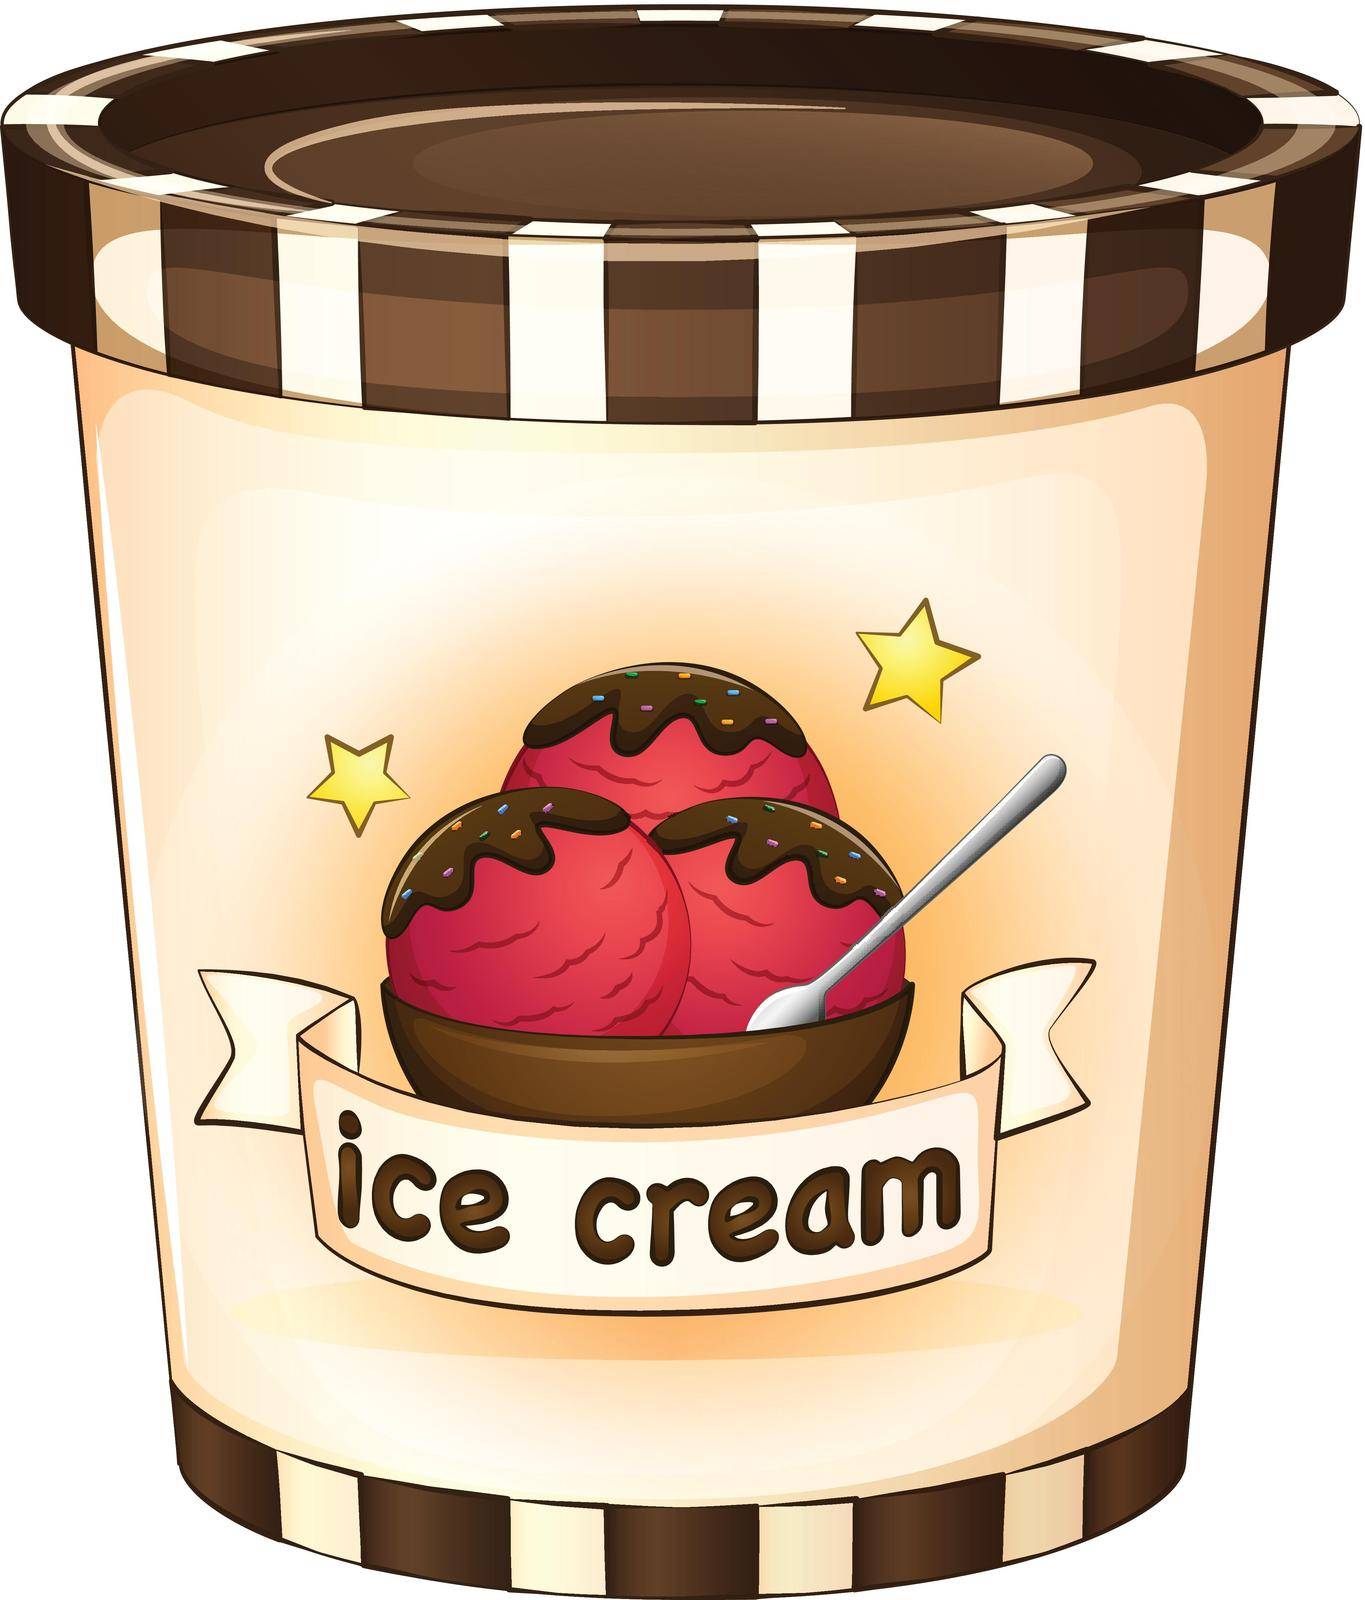 Illustration of the icecream inside the disposable cup on a white background